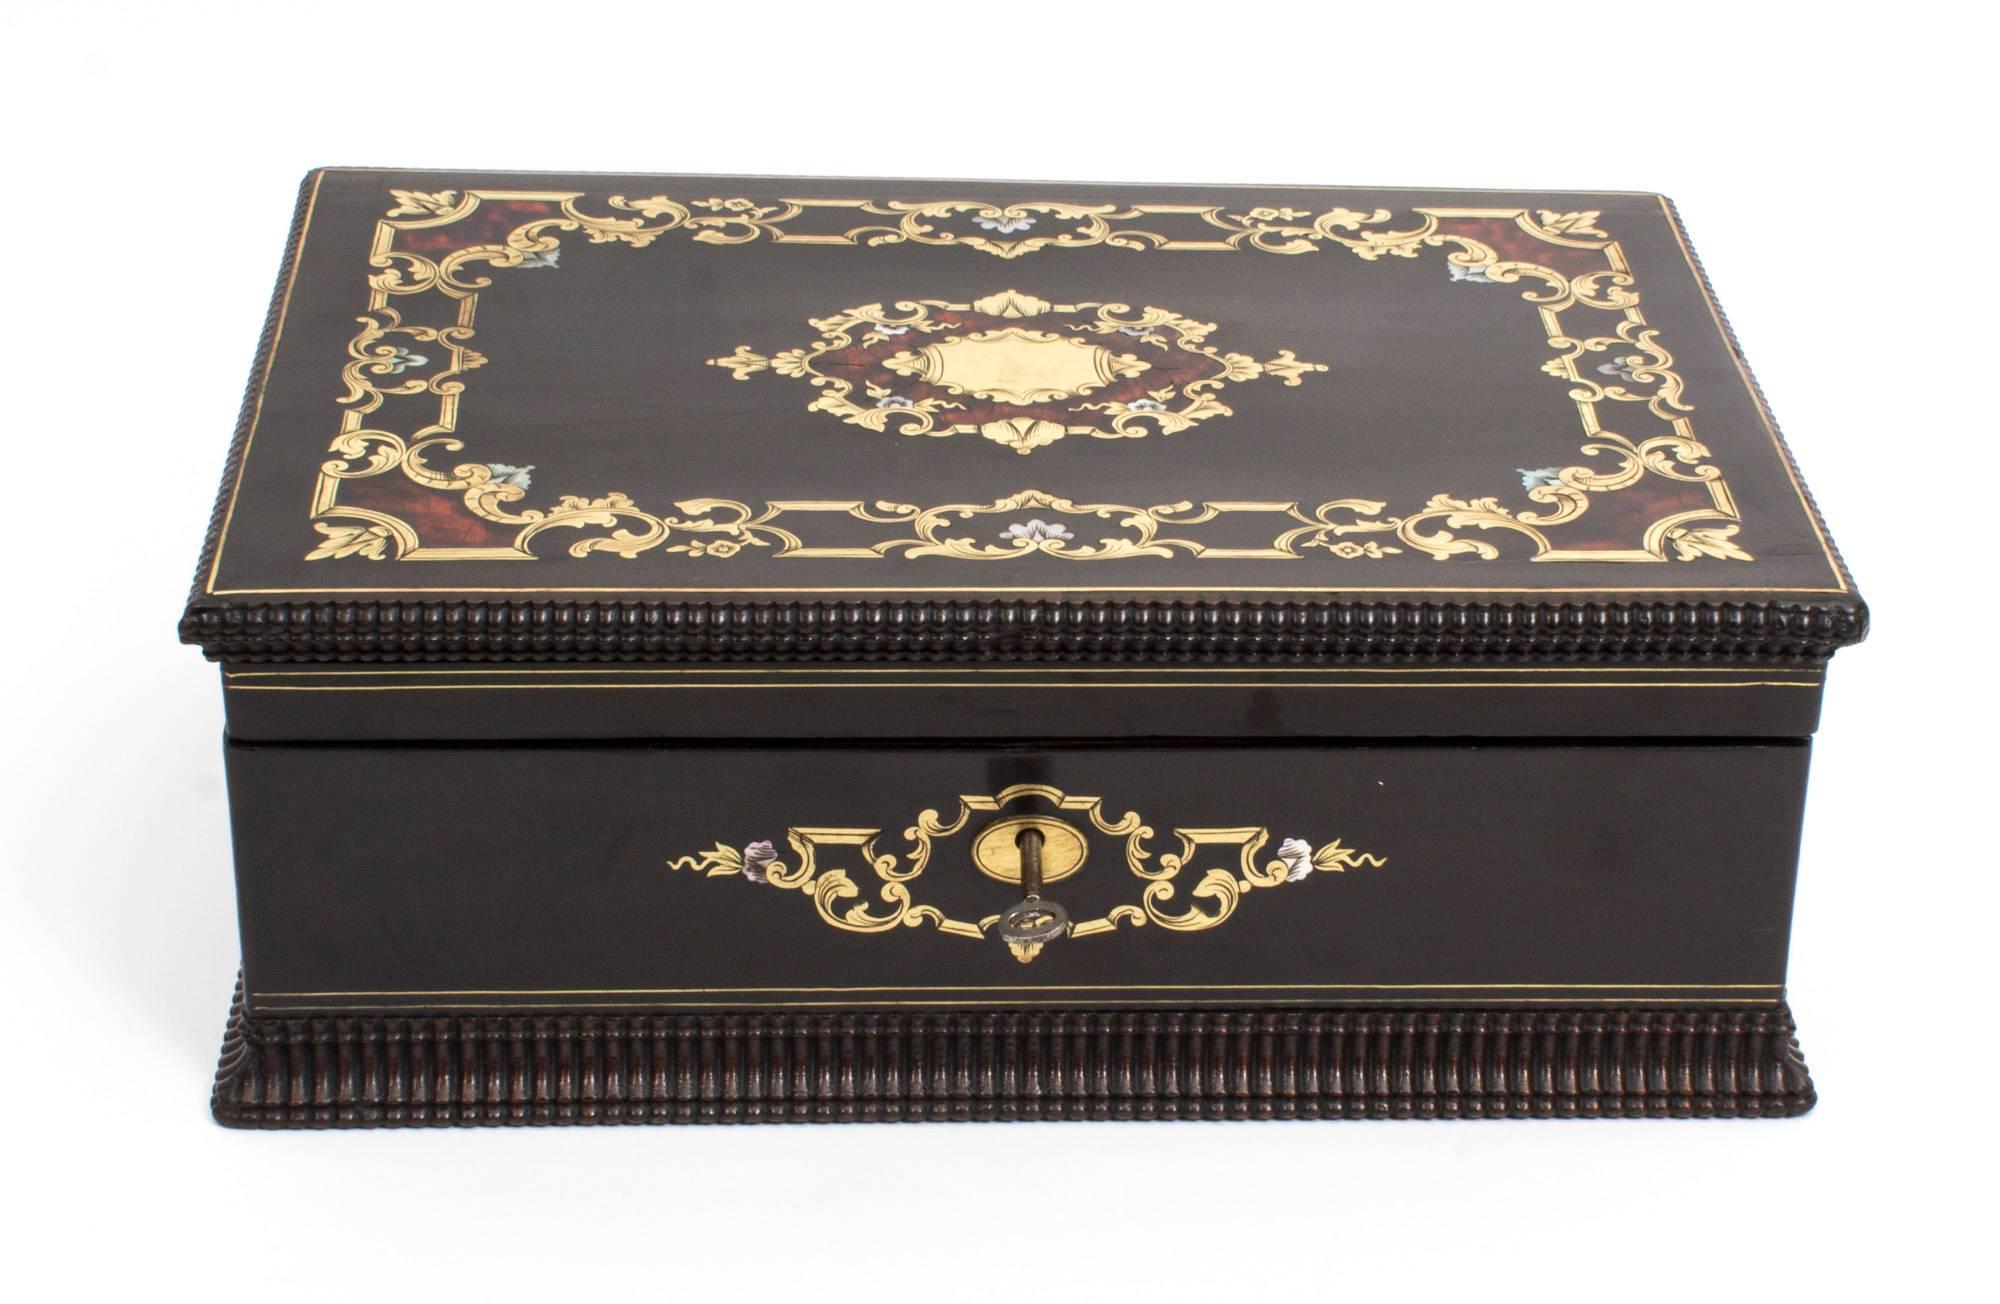 This is a beautiful antique French ebonized mother-of-pearl and cut brass red “Boulle” jewelry box, circa 1860 in date.

The lid and base have been edged with attractive beaded decoration and the top and front extensively inlaid with brass and